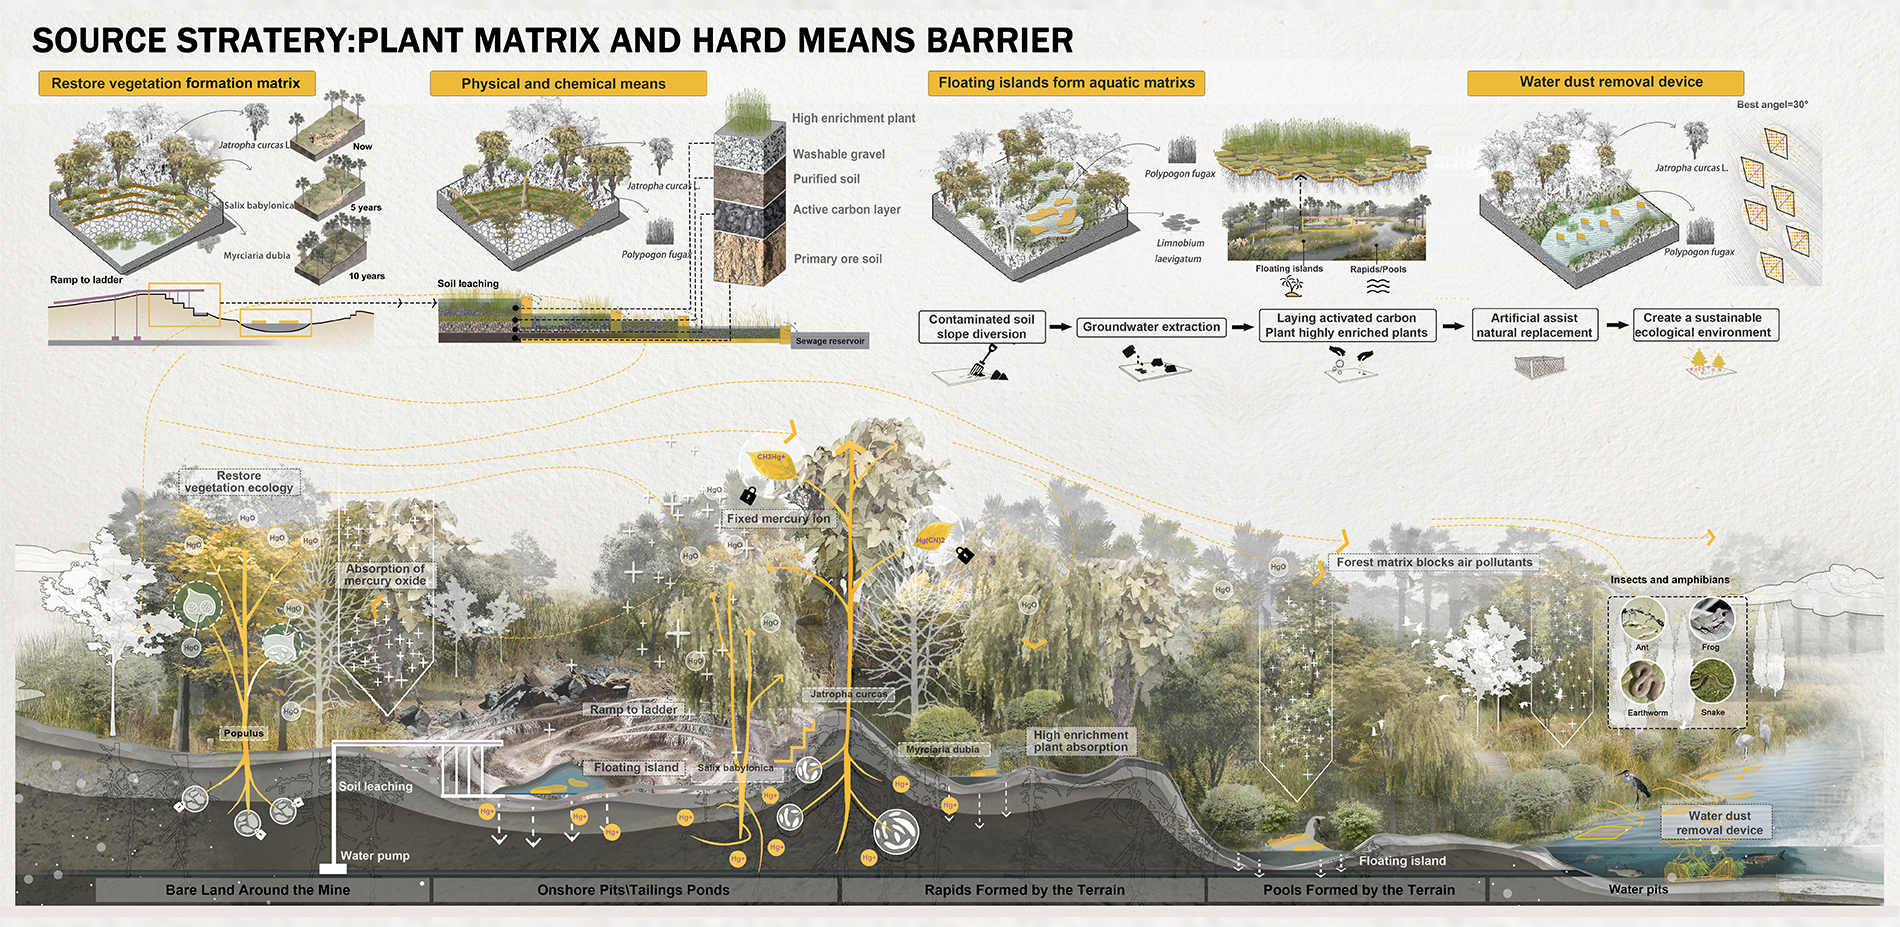 Source strategy: plant matrix and hard means barrier